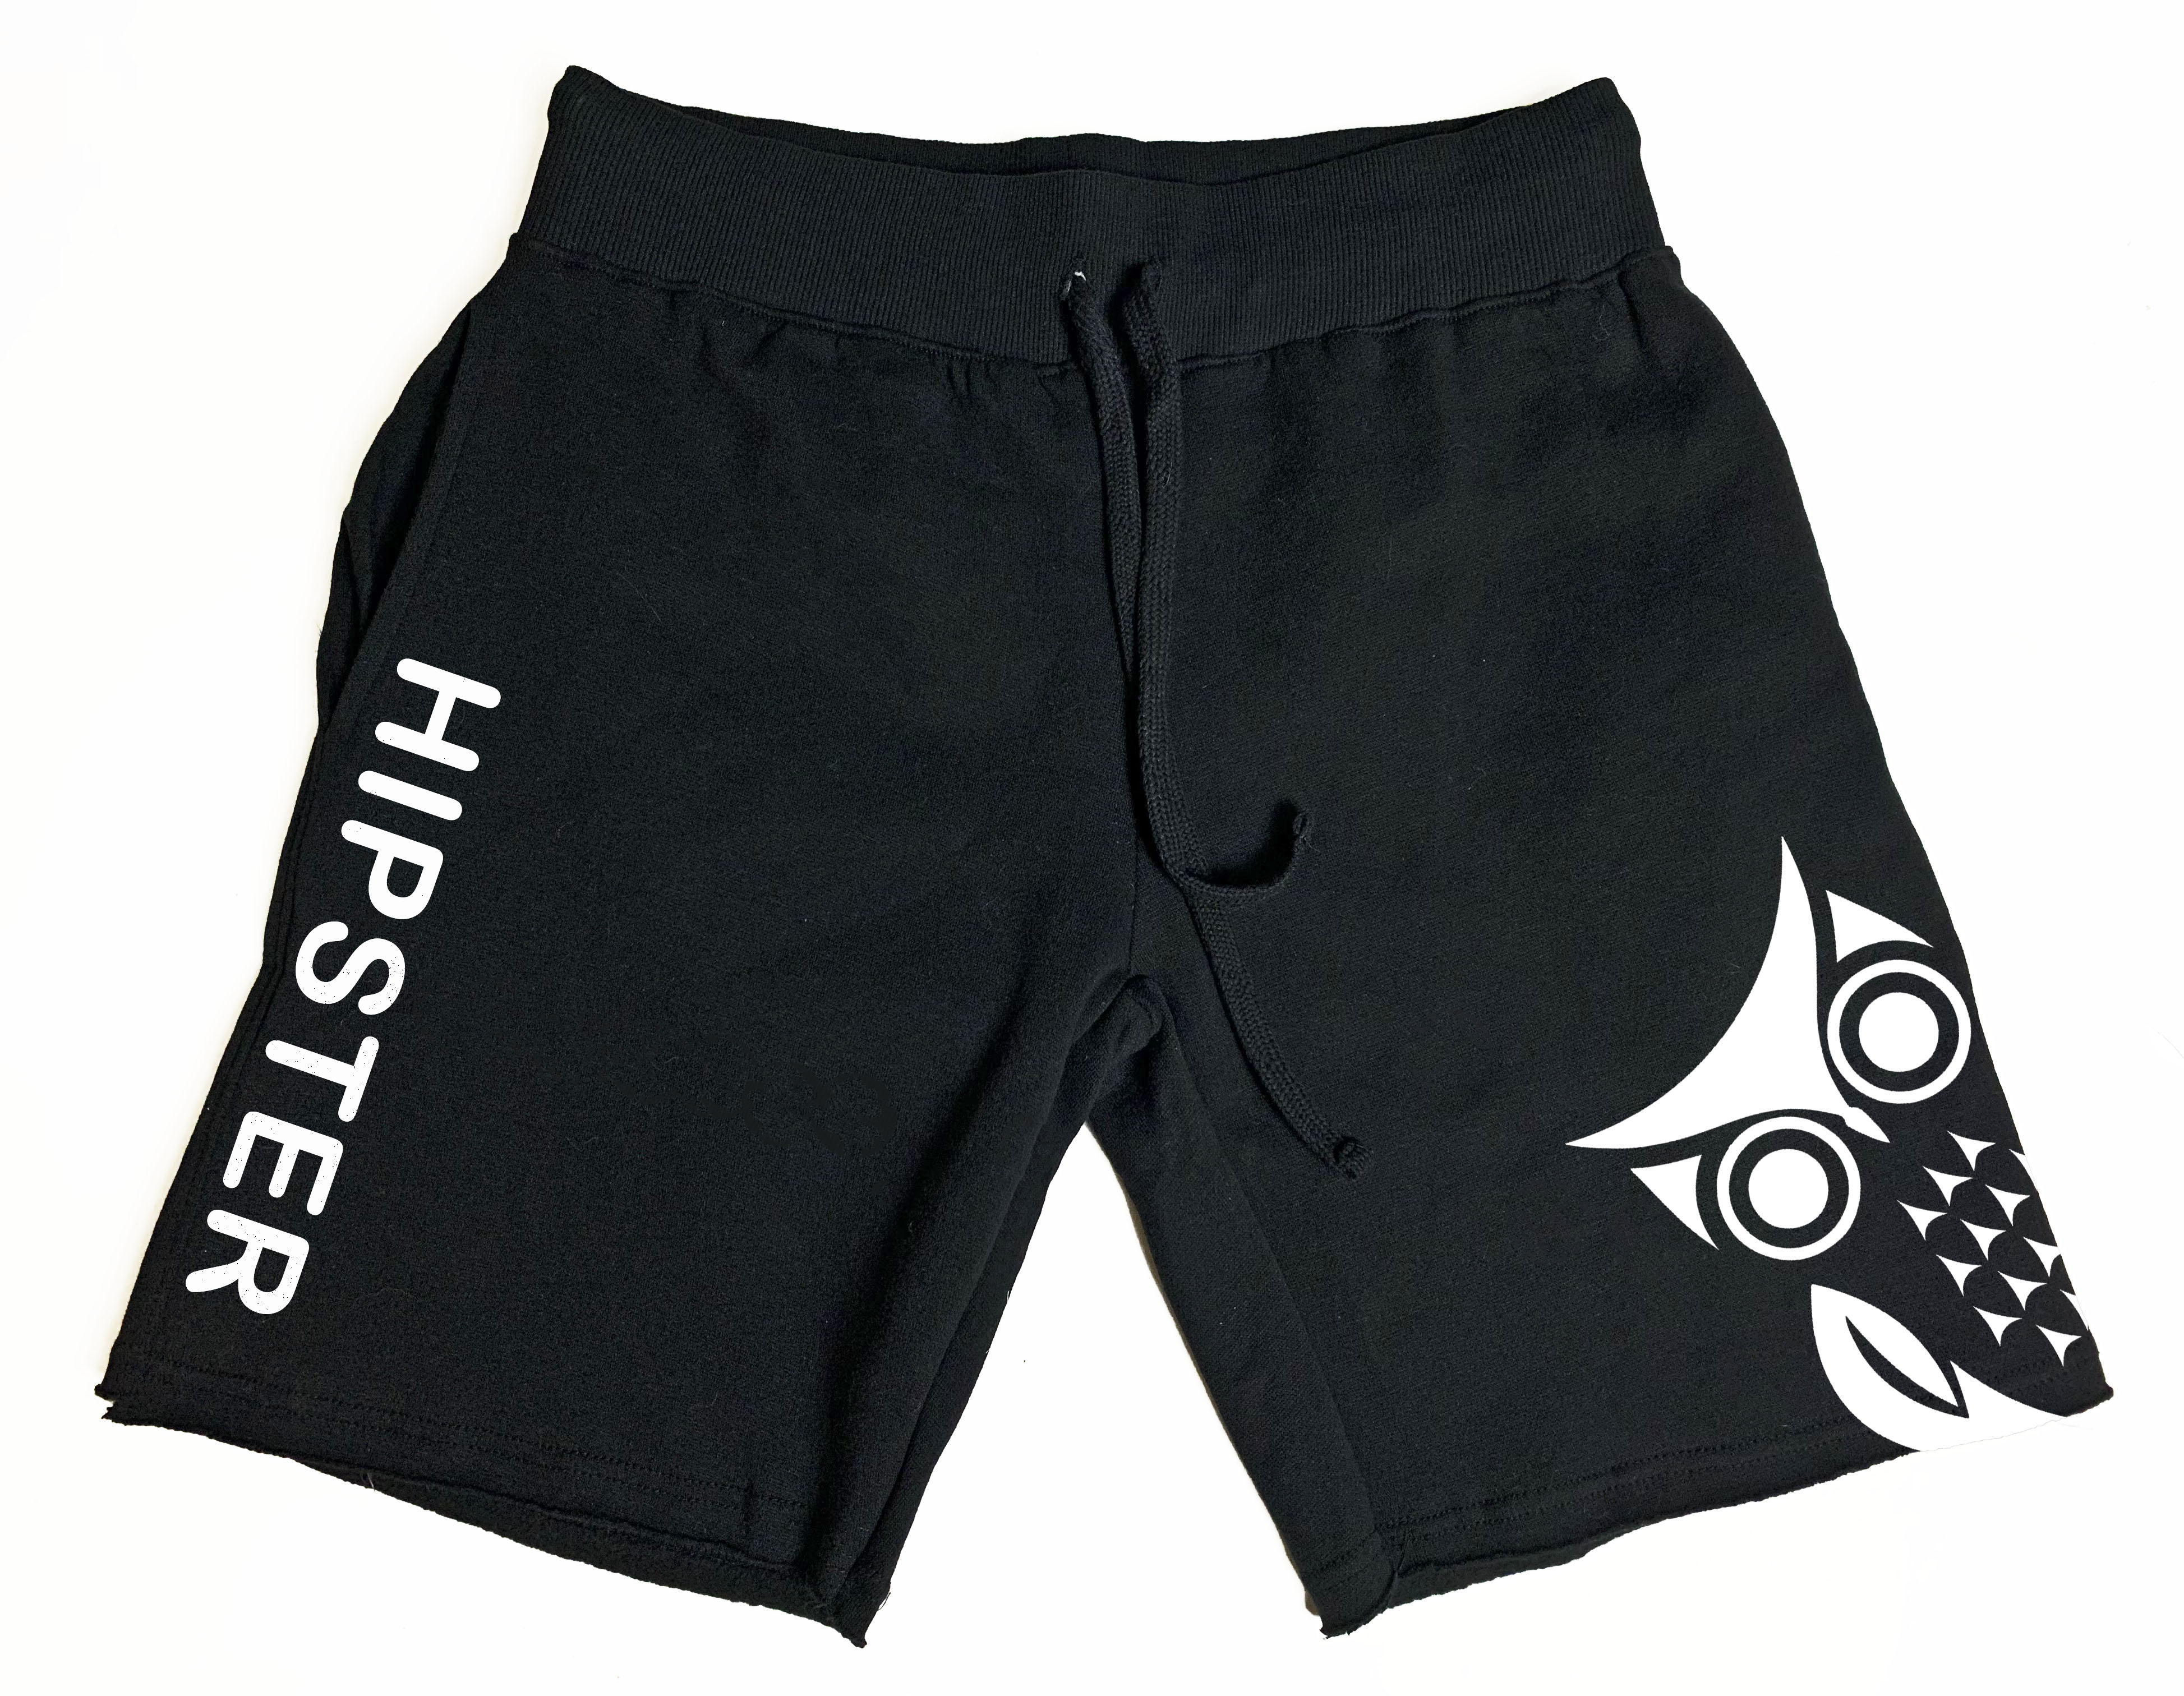 Jogger Short with Hipster logo and side print - Black